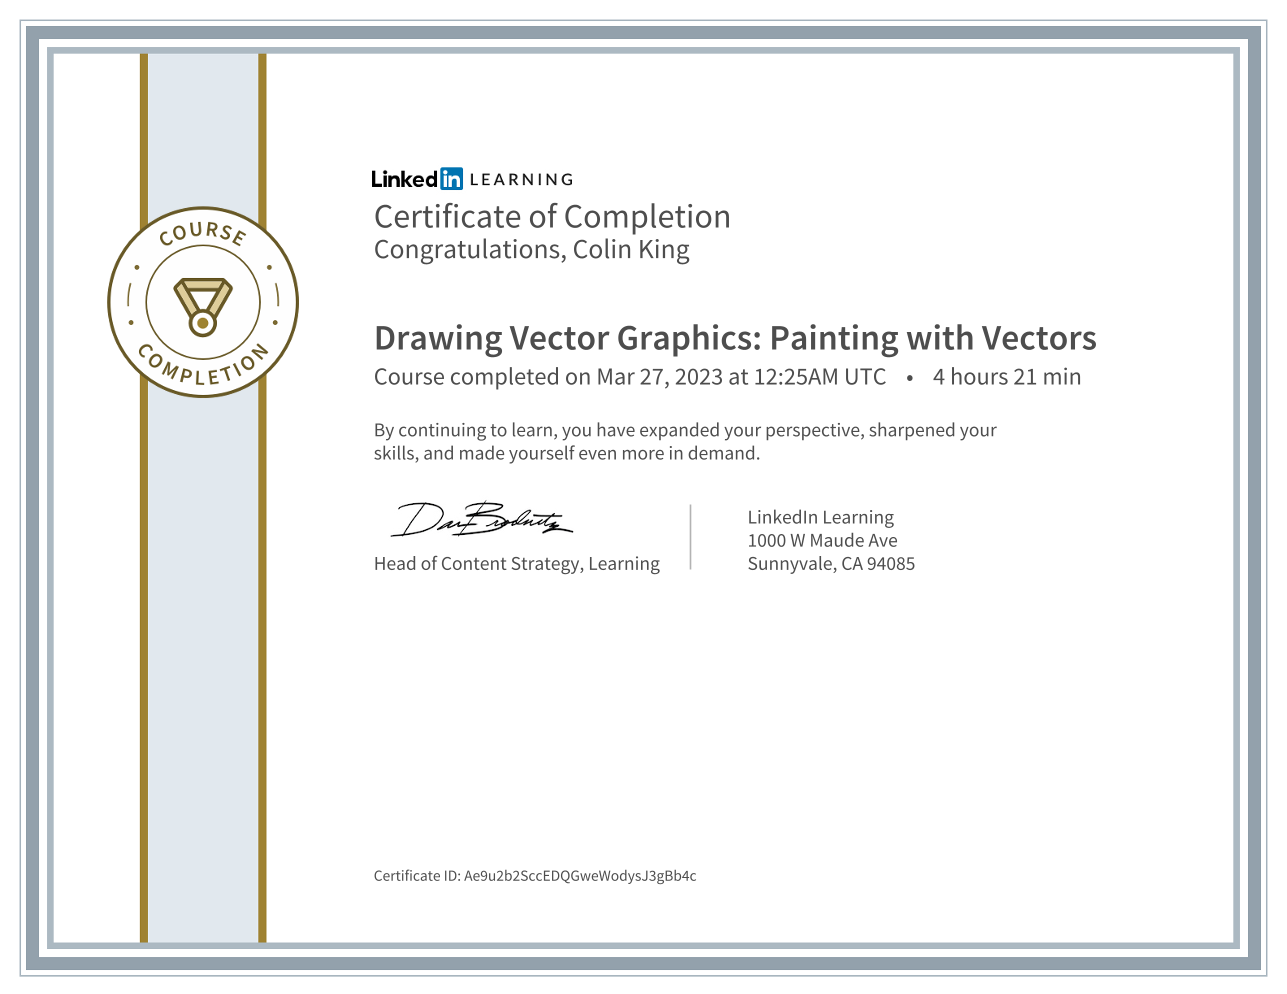 Drawing Vector Graphics certificate